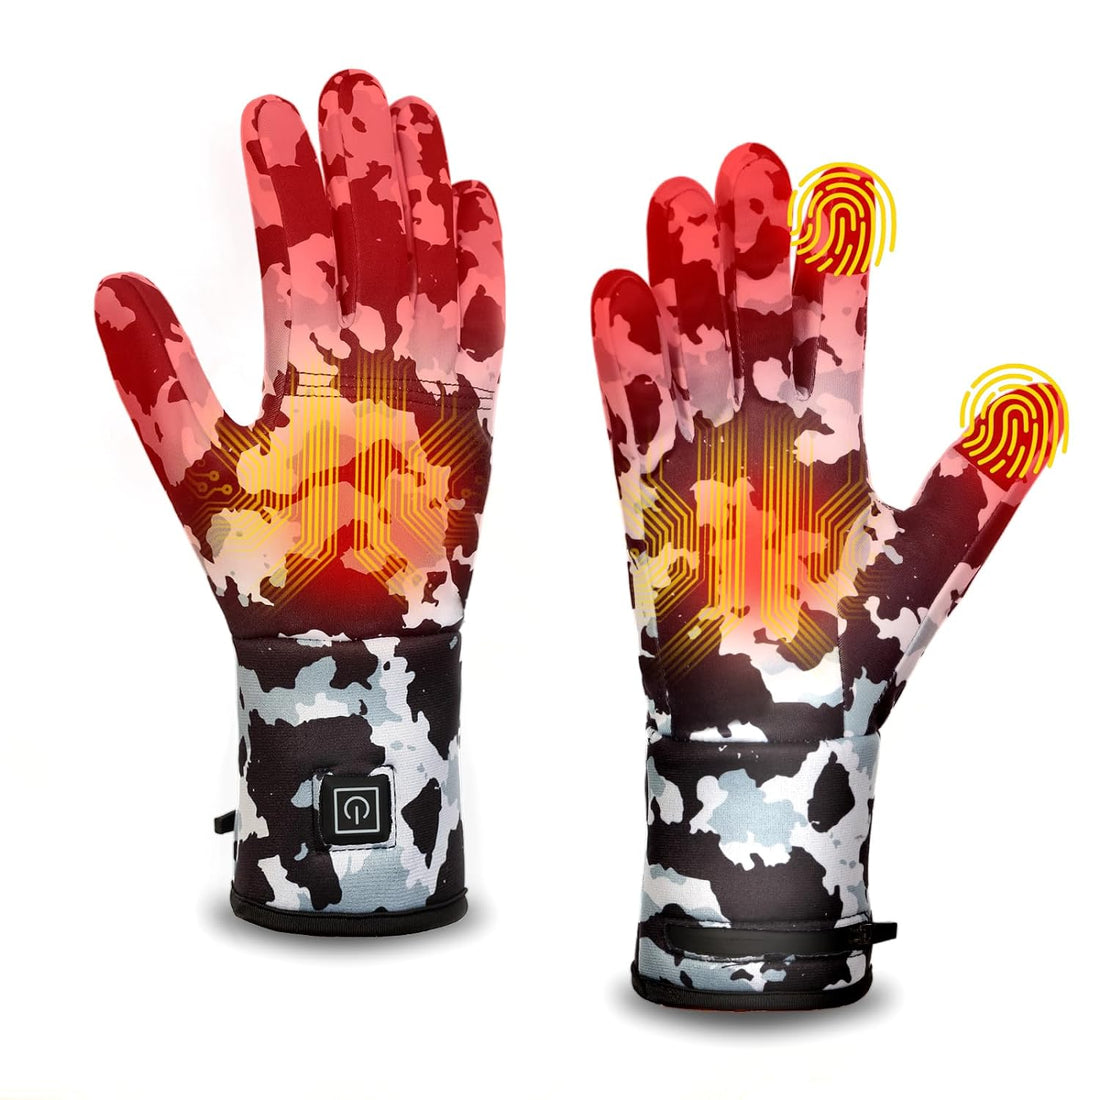 Heated Glove Liners for Men Women, Rechargeable Hand Warmers, Thin Camouflage Touchscreen Battery Electric Gloves Liner